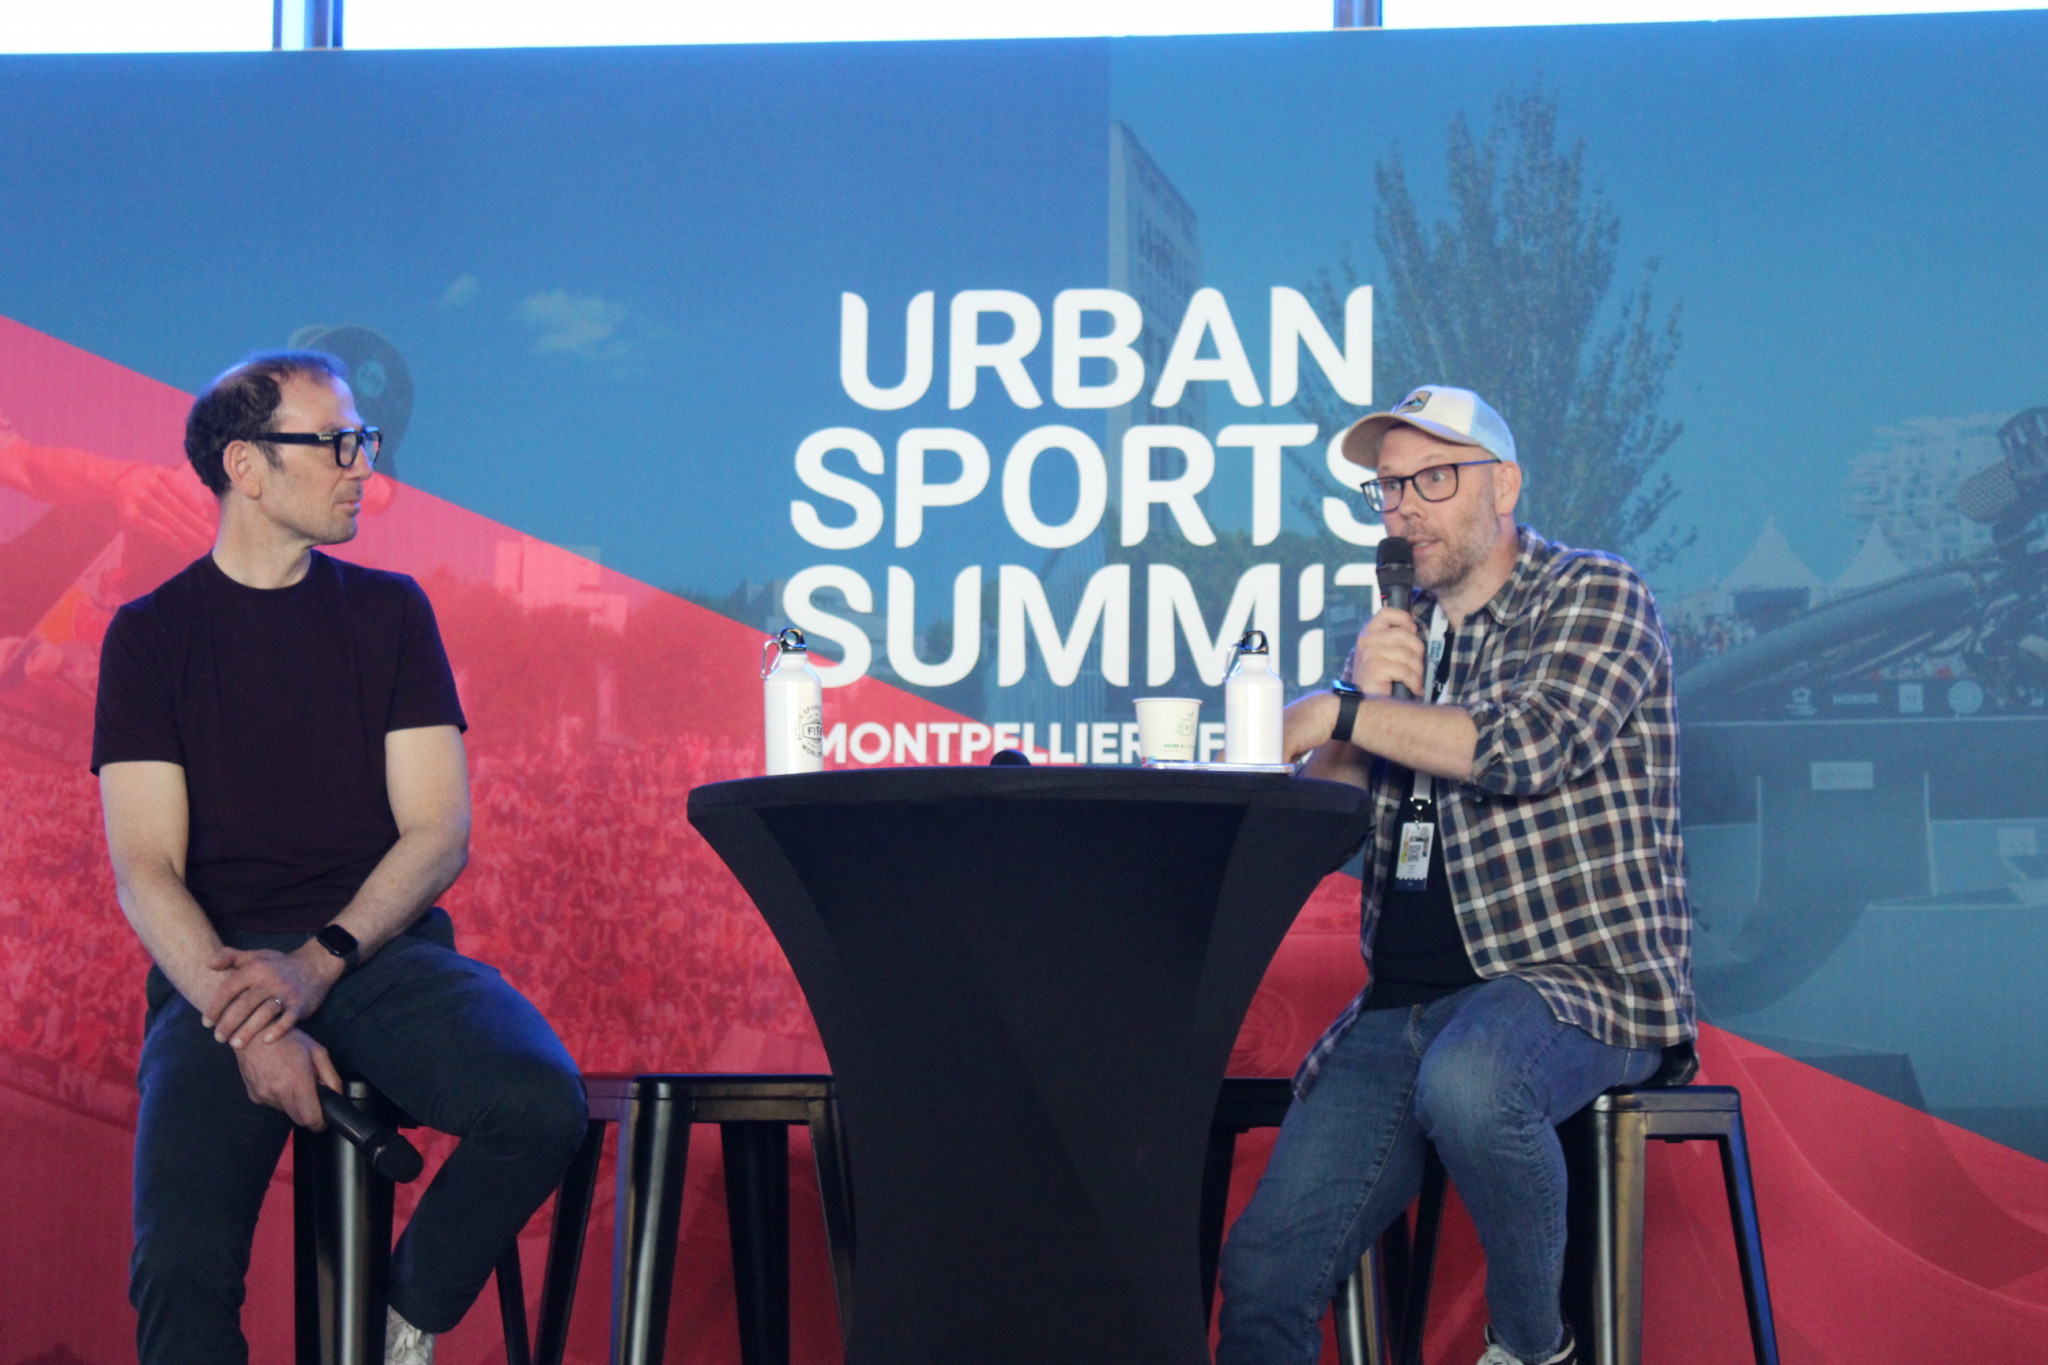 Urban Sports Summit concludes while rain fails to stop FISE partying